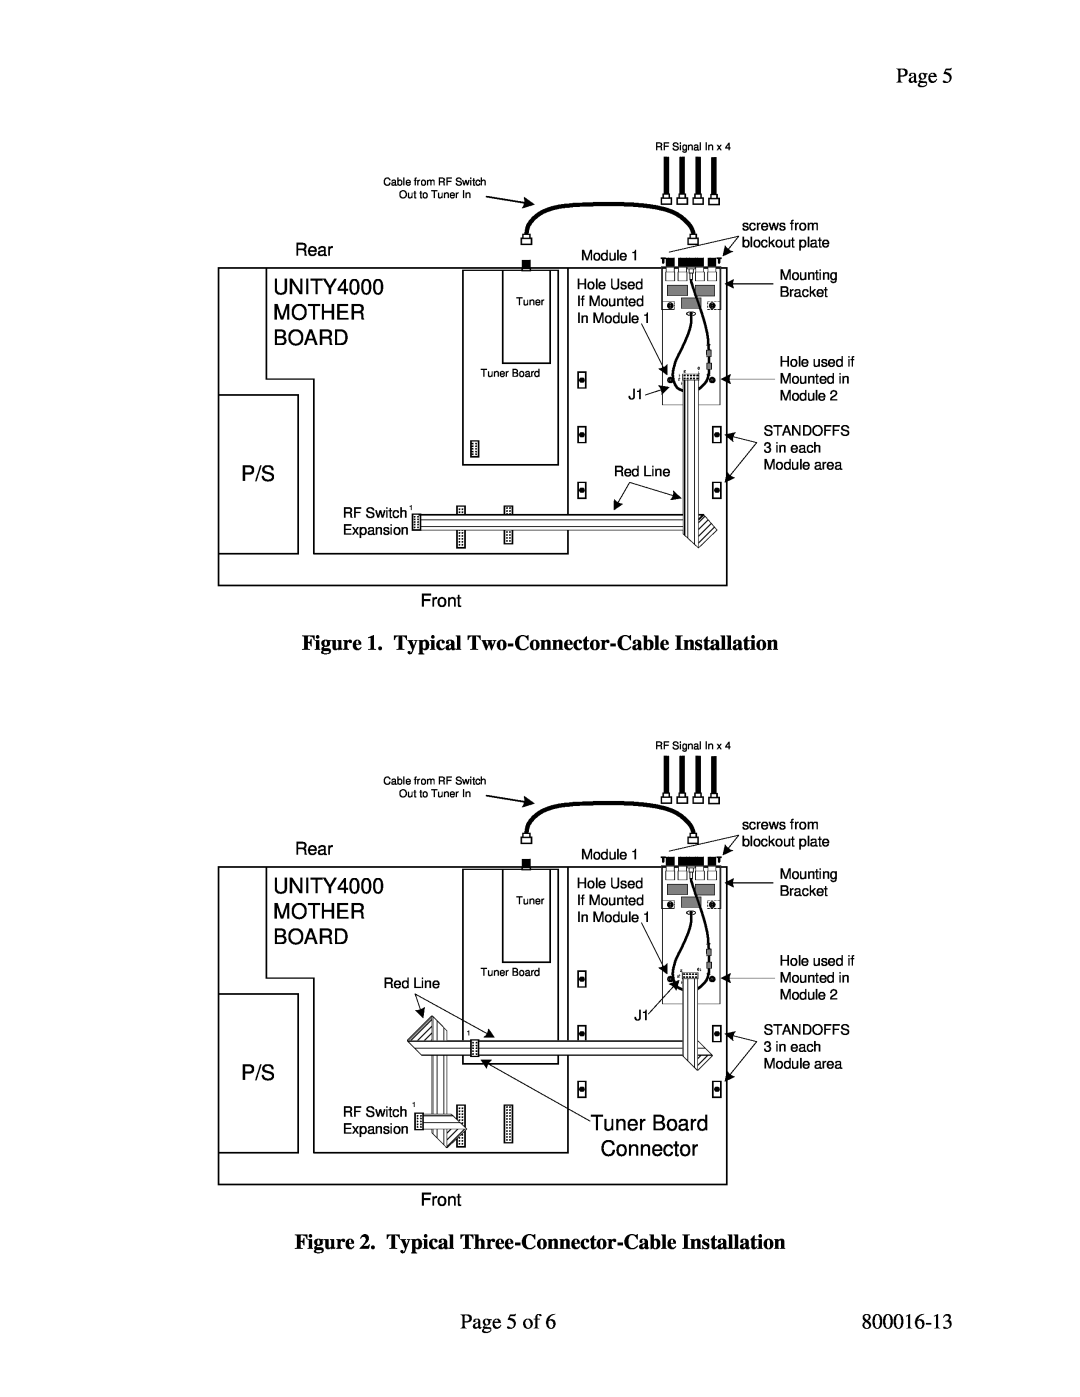 Wegener Communications Unity RF Switch manual Typical Two-Connector-Cable Installation 